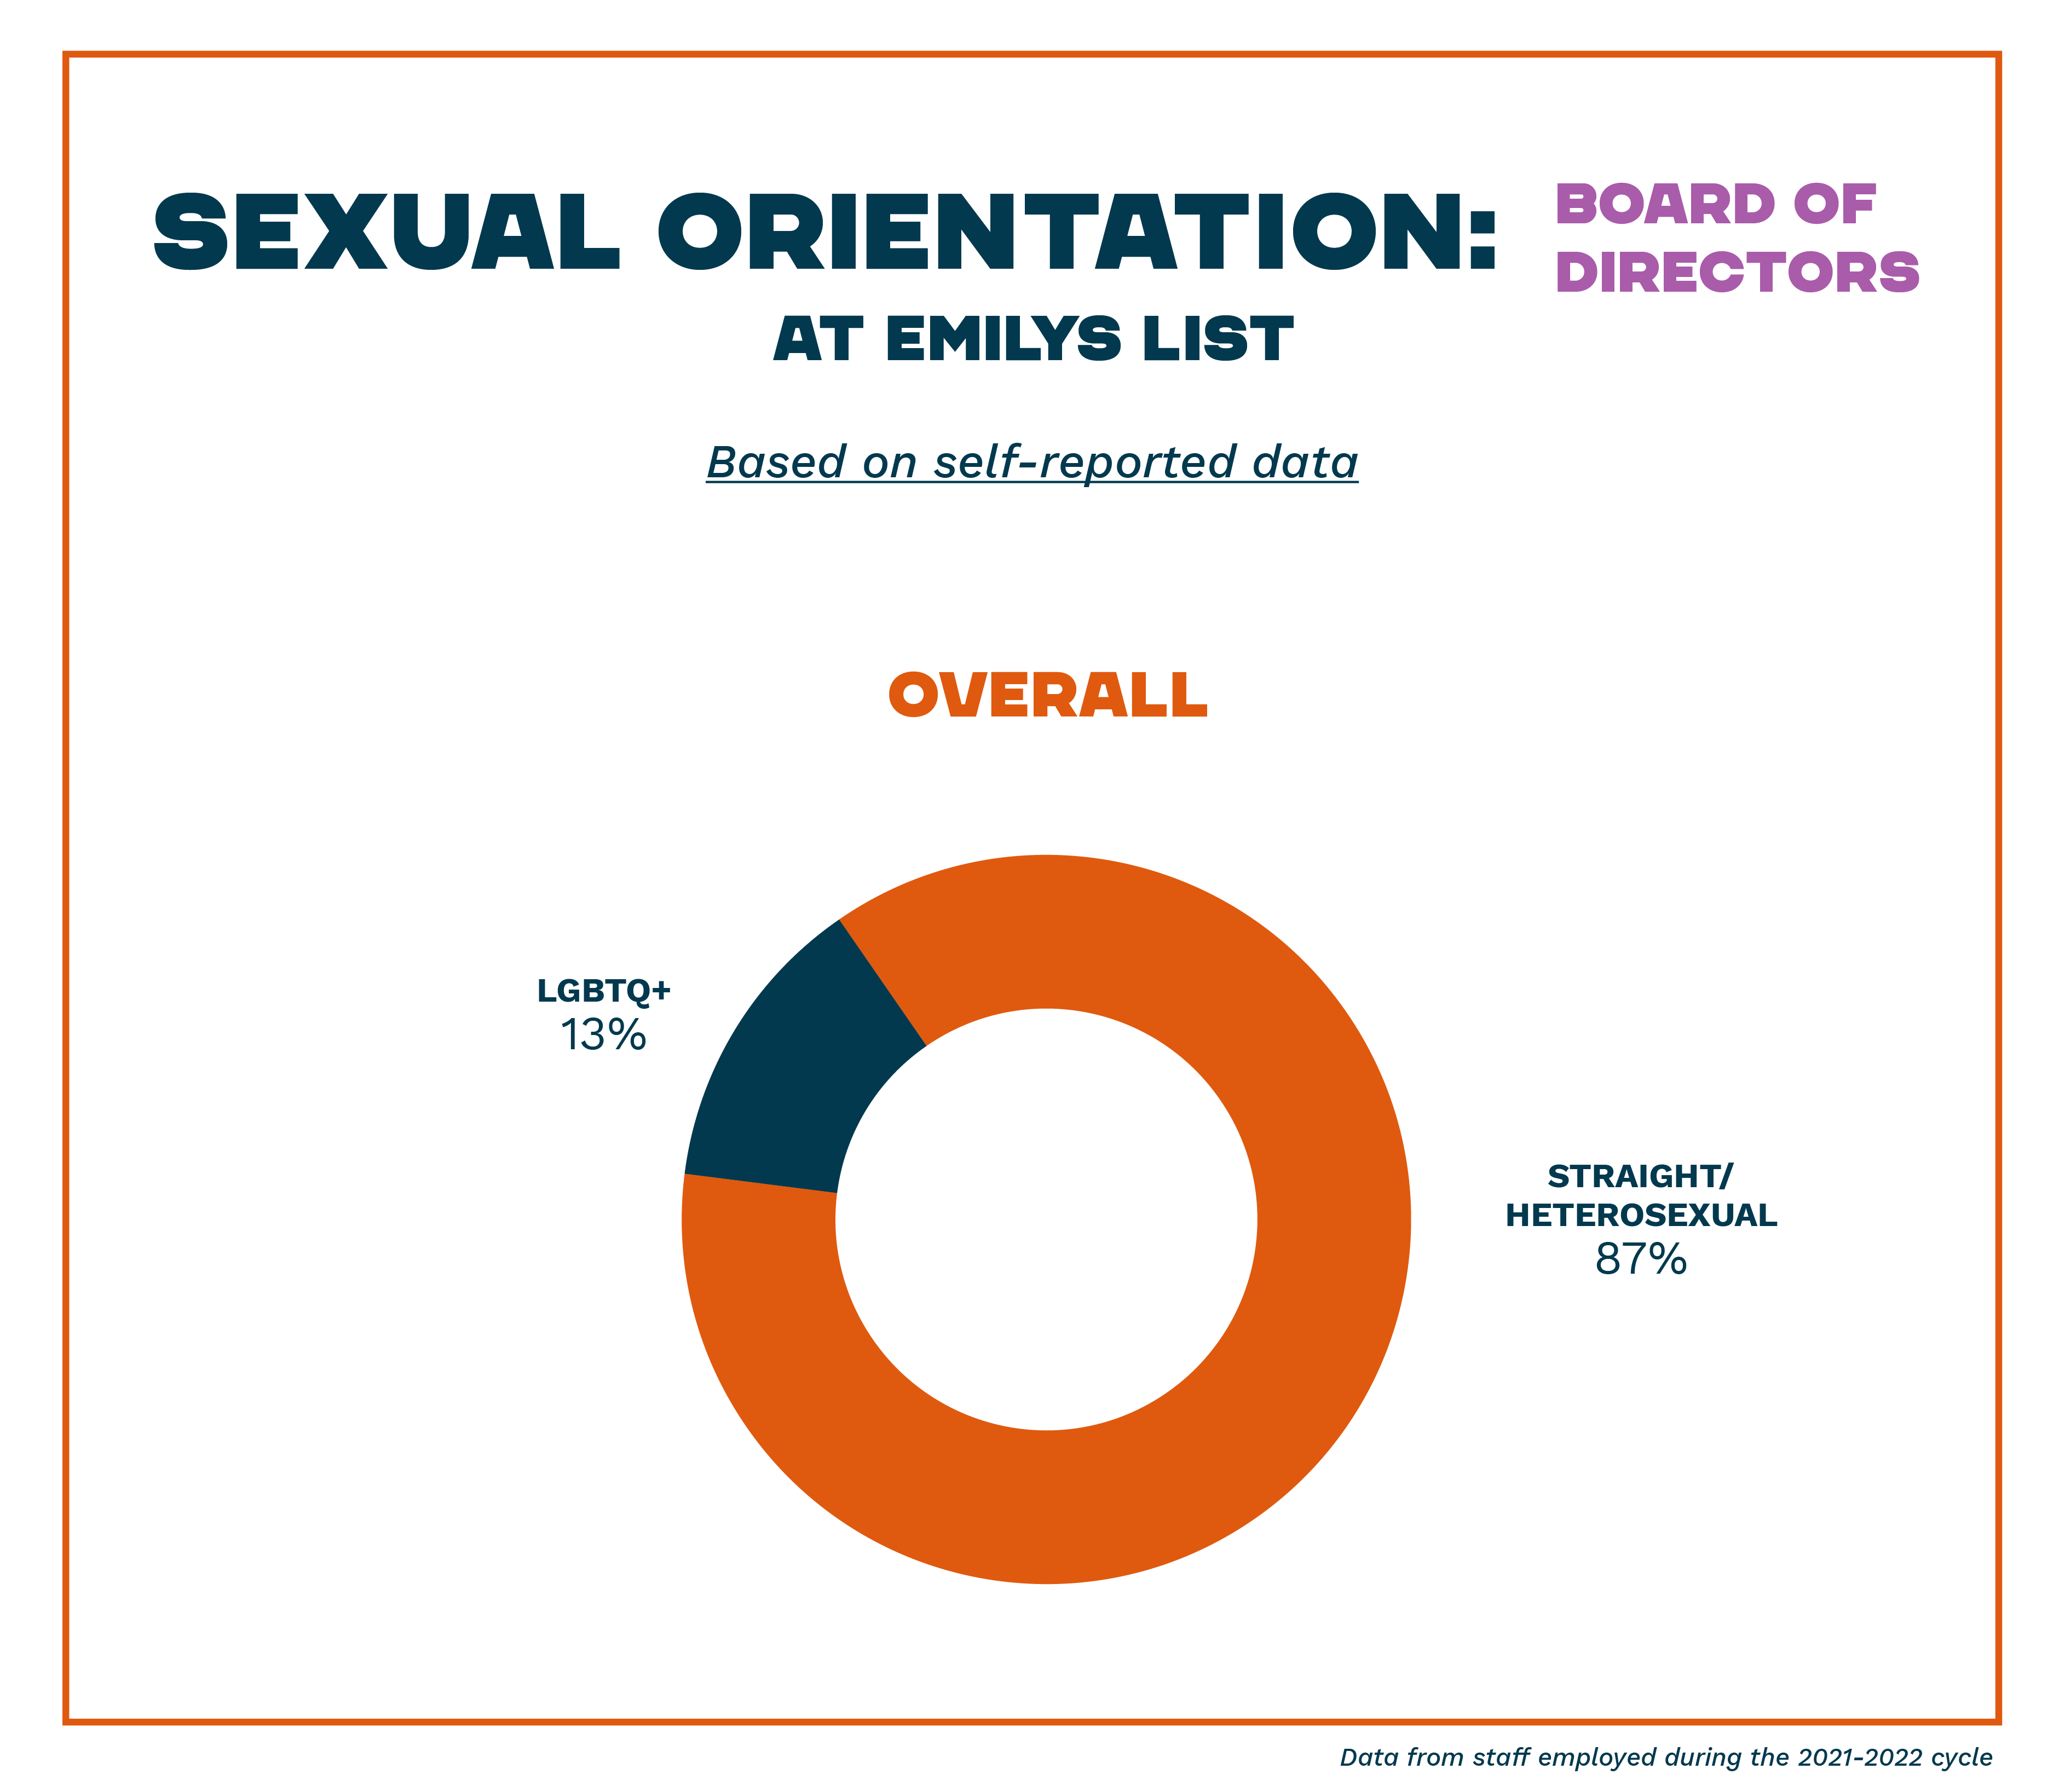 Sexual Orientation: Board of Directors at EMILYs List- Based on self-reported data - Overall: Straight/Heterosexual 87%, LGBTQ+ 13%  - Data from staff employed during the 2021-2022 cycle